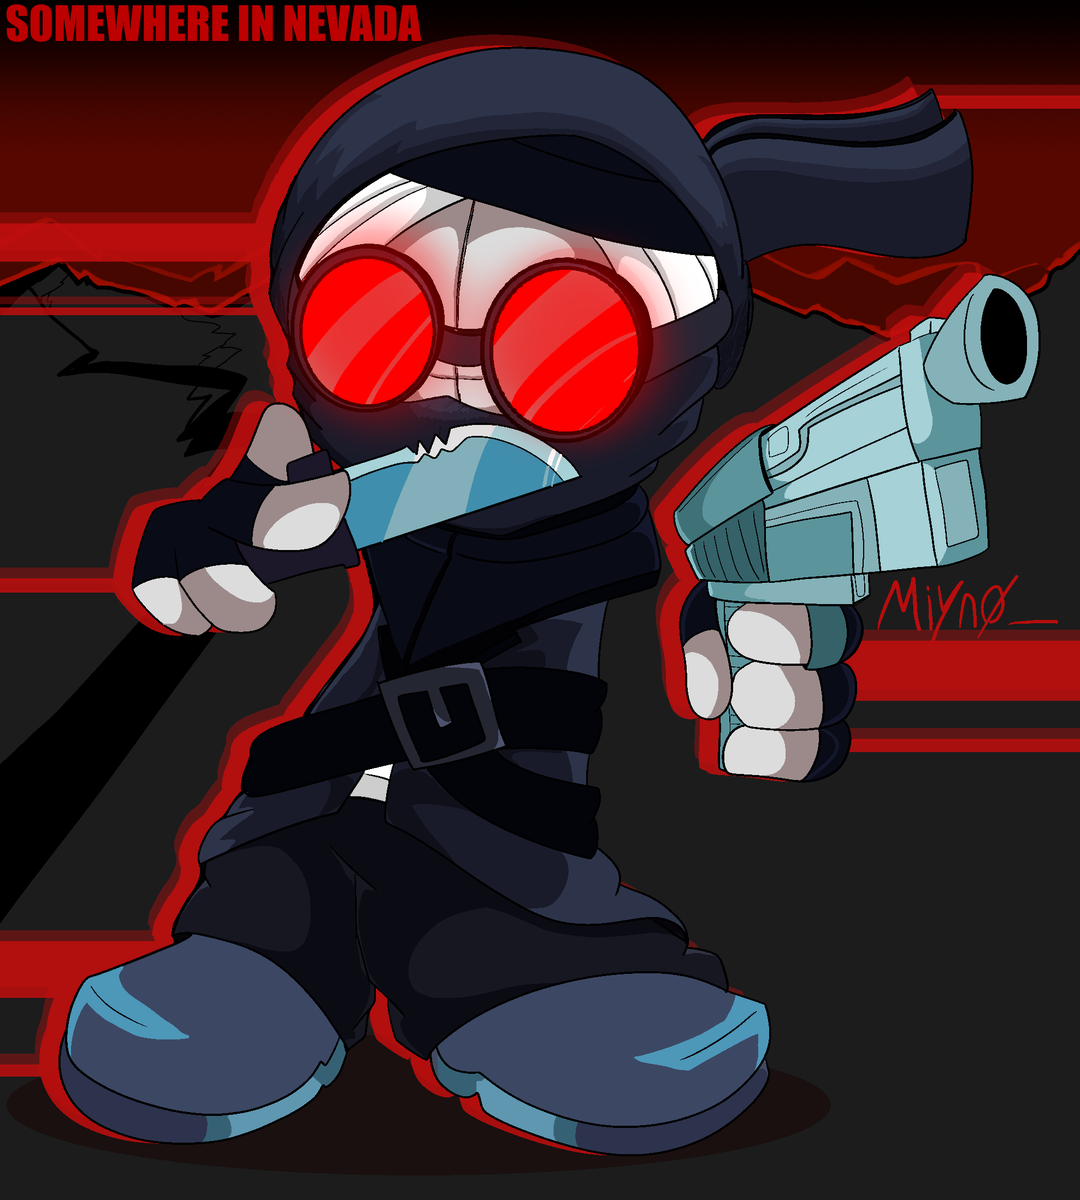 Miyno_ - S o m e w h e r e i n N e v a d a. Drew the epic Hank from Madness Combat #newgrounds